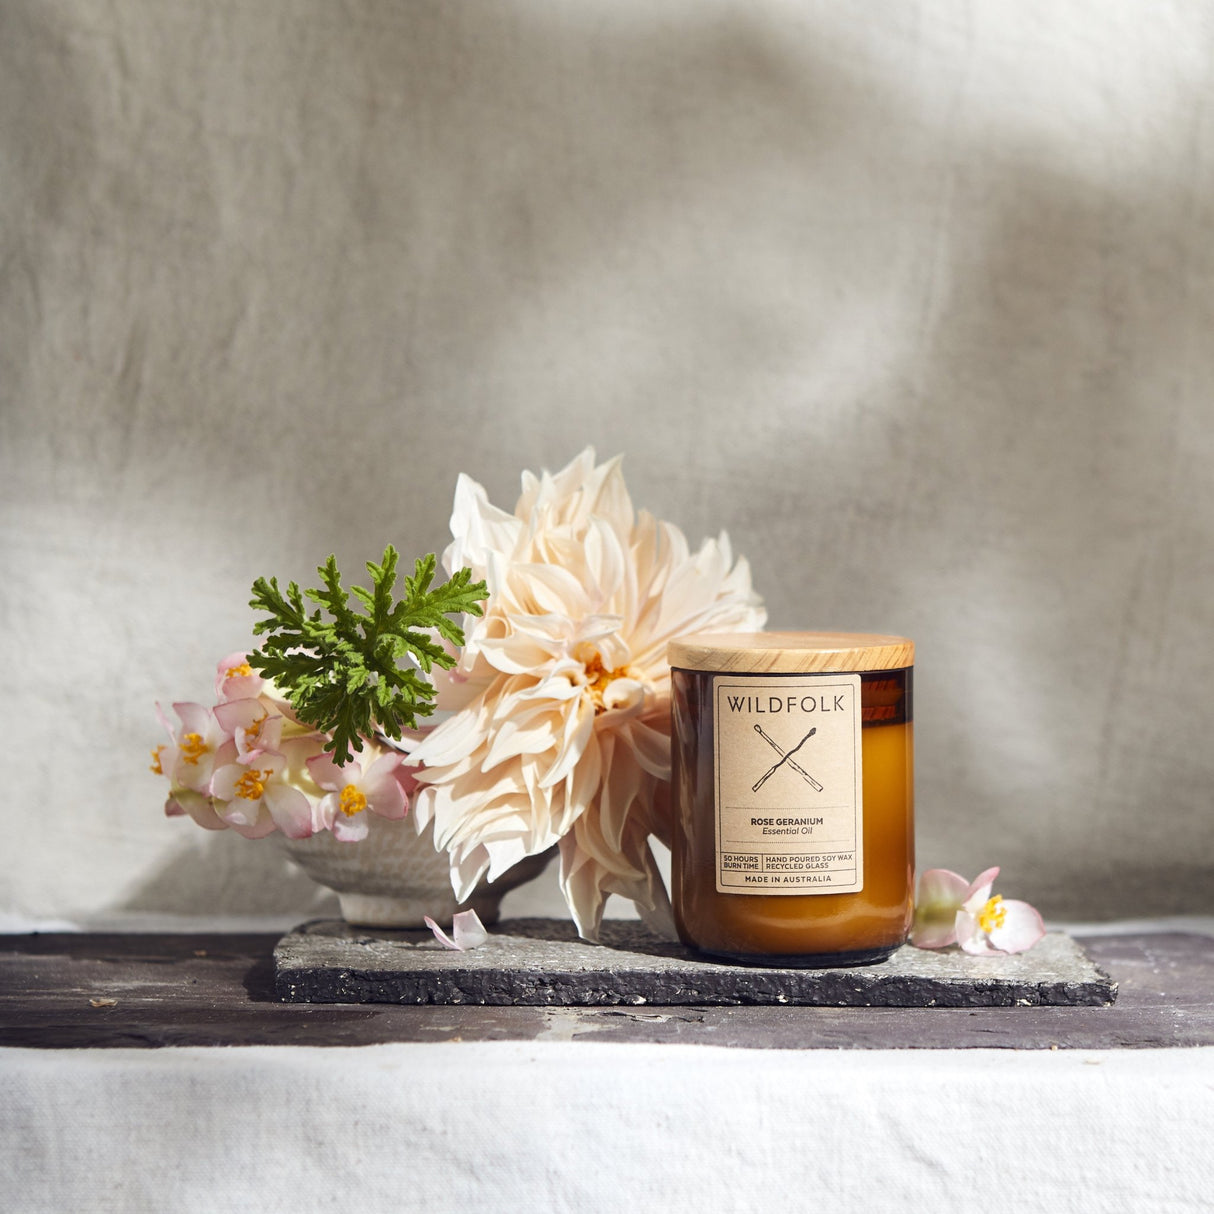 Wildfolk Rose Geranium - Dr Earth - Scented soy wax candle